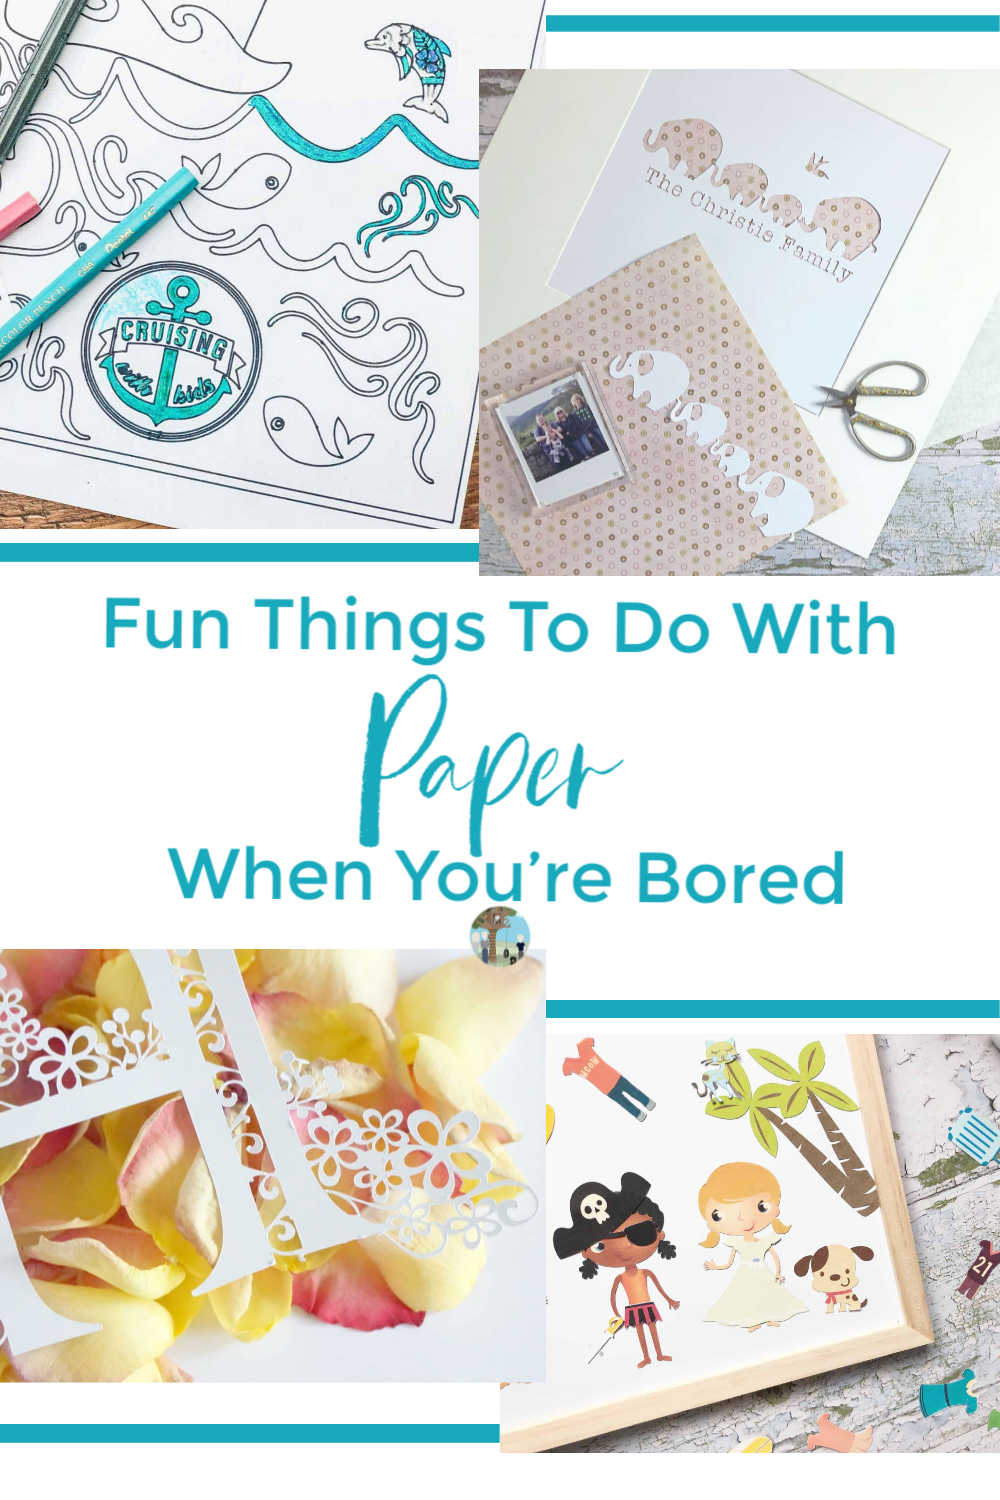 Fun Things To Do With Paper When You're Bored, great paper craft ideas for families, kids and teens